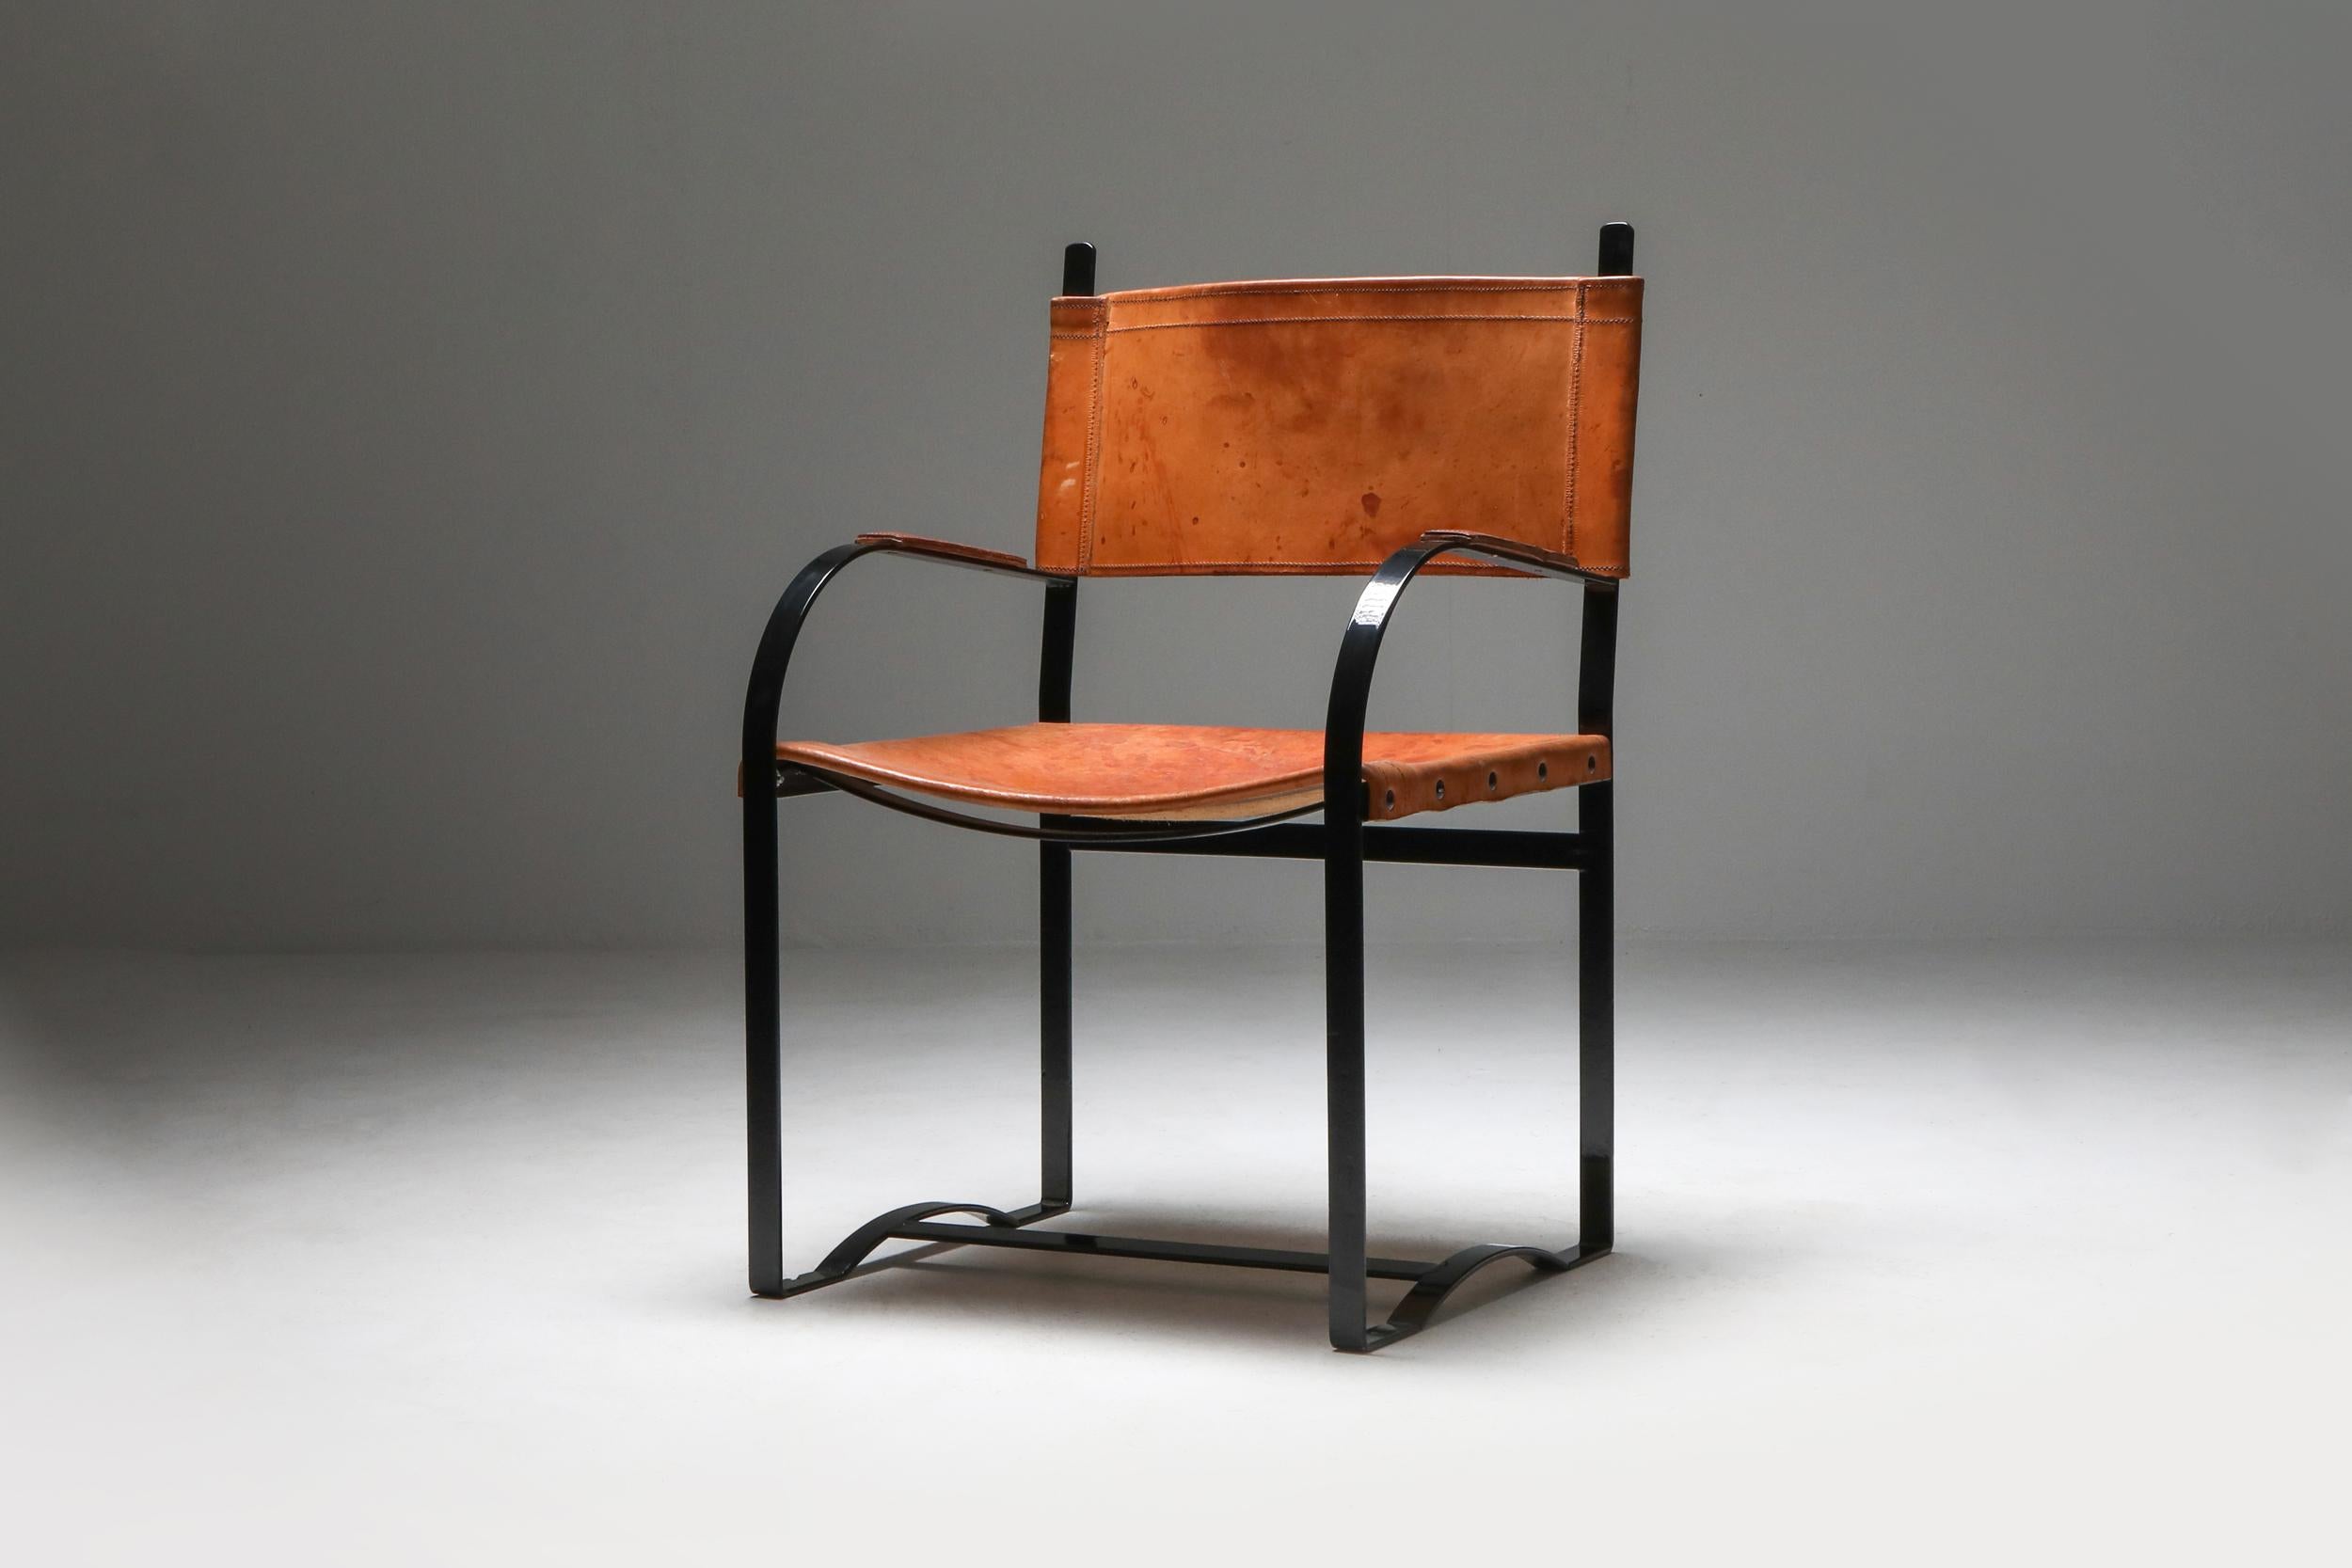 Black lacquer steel and patinated cognac leather chairs, Belgium, the 1960s
Unusual and wide armchairs, thick leather seating, solid steel frame
They would fit well in a rustic modern, chalet-style interior.
 
 